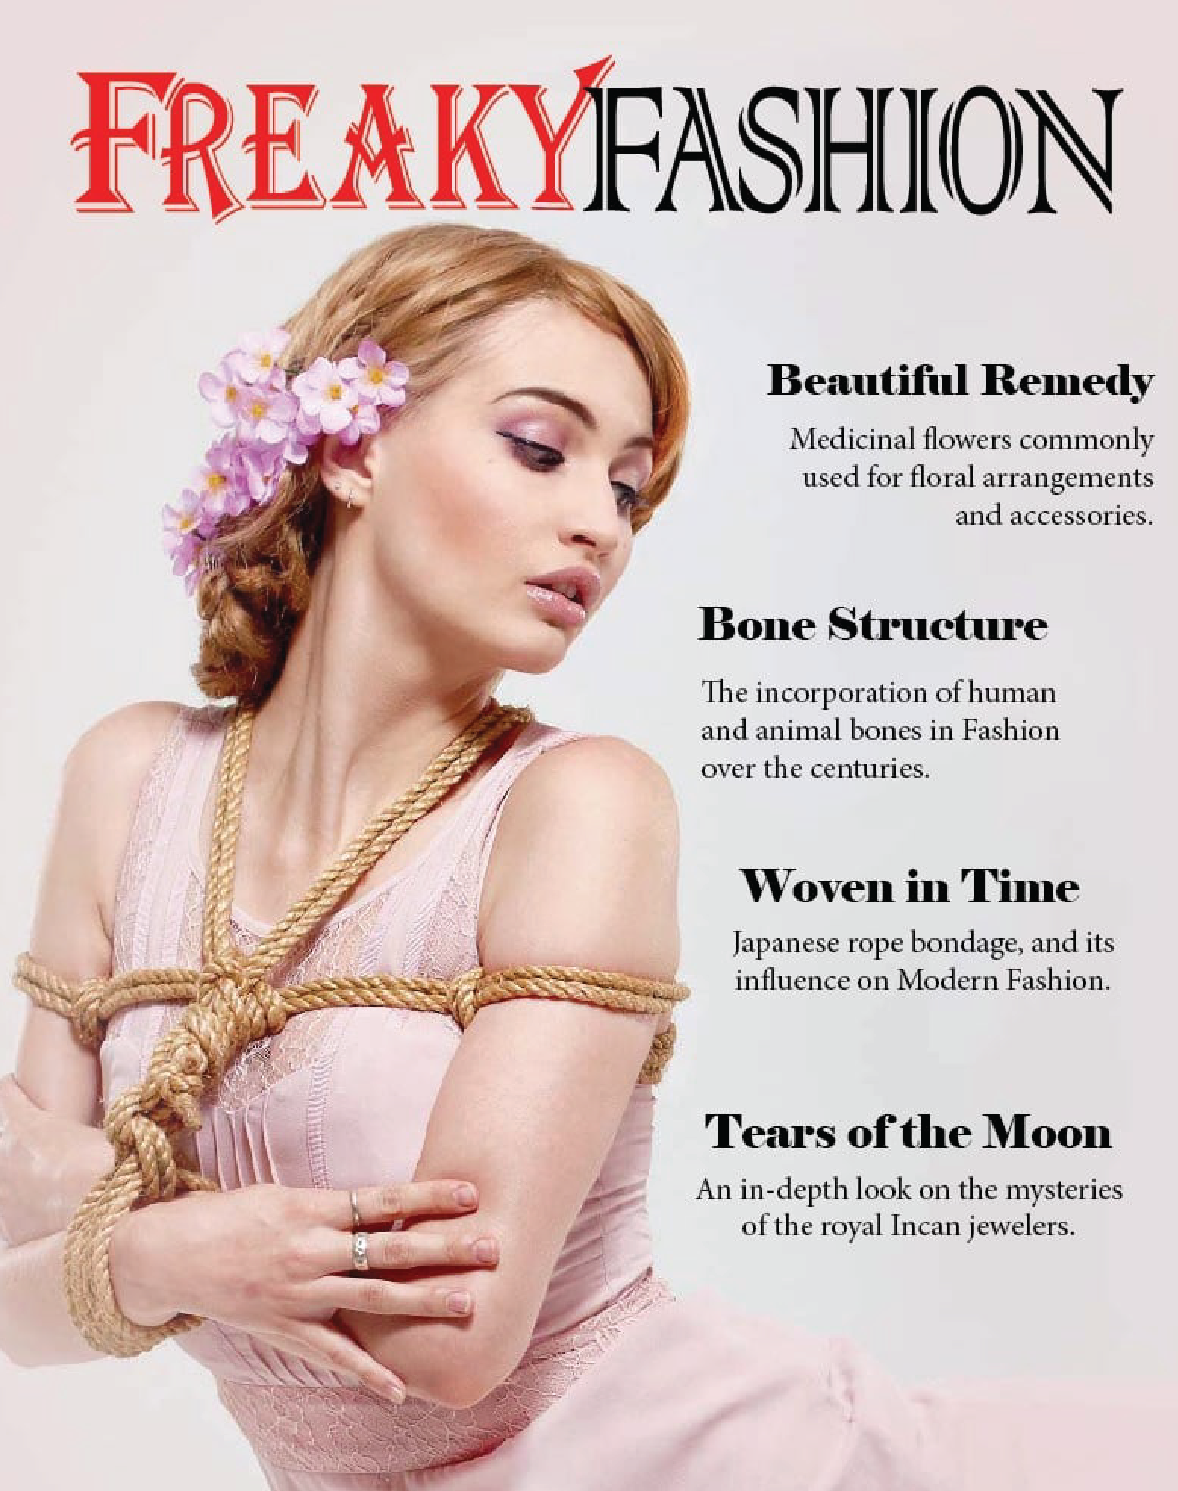 Fictious Magazine Cover featuring an image of a woman tied in a TK chest harness, with flowers in her hair, the logo 'Freaky Fashion' and Articles titled 'Beautiful Remedy', 'Bone Structure', 'Woven in Time' and 'Tears of the Moon'. 